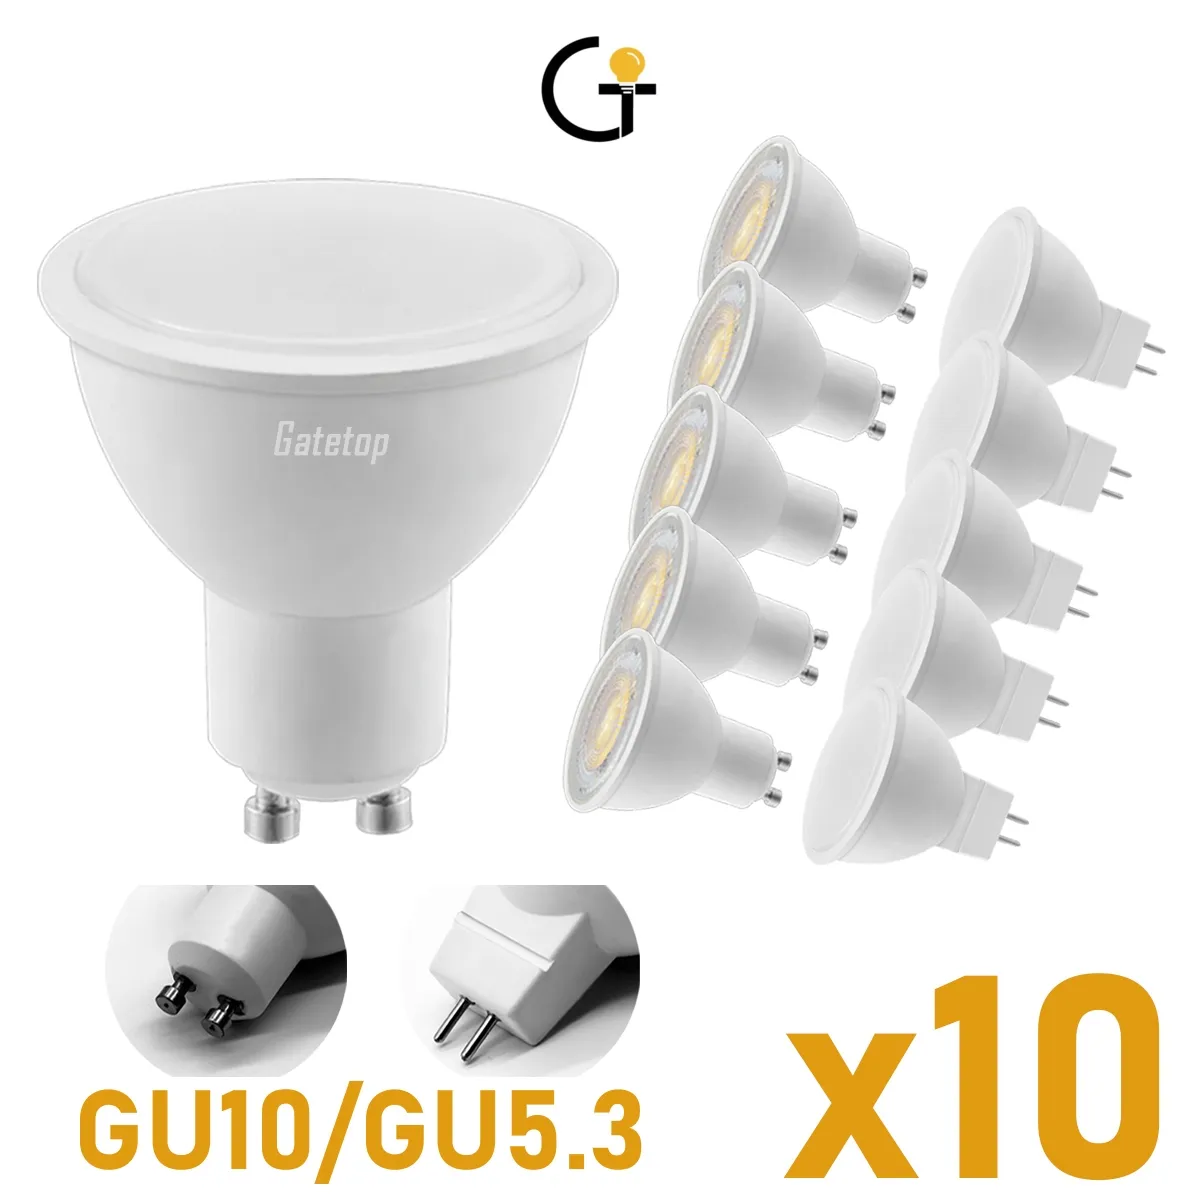 10PCS/LOT Spot Foco Gu10 GU5.3 Spotlight AC220V 3W-8W 3000K/4000K/6000K LED  Light Lamp For Home Decoration Replace Halogen Lamp